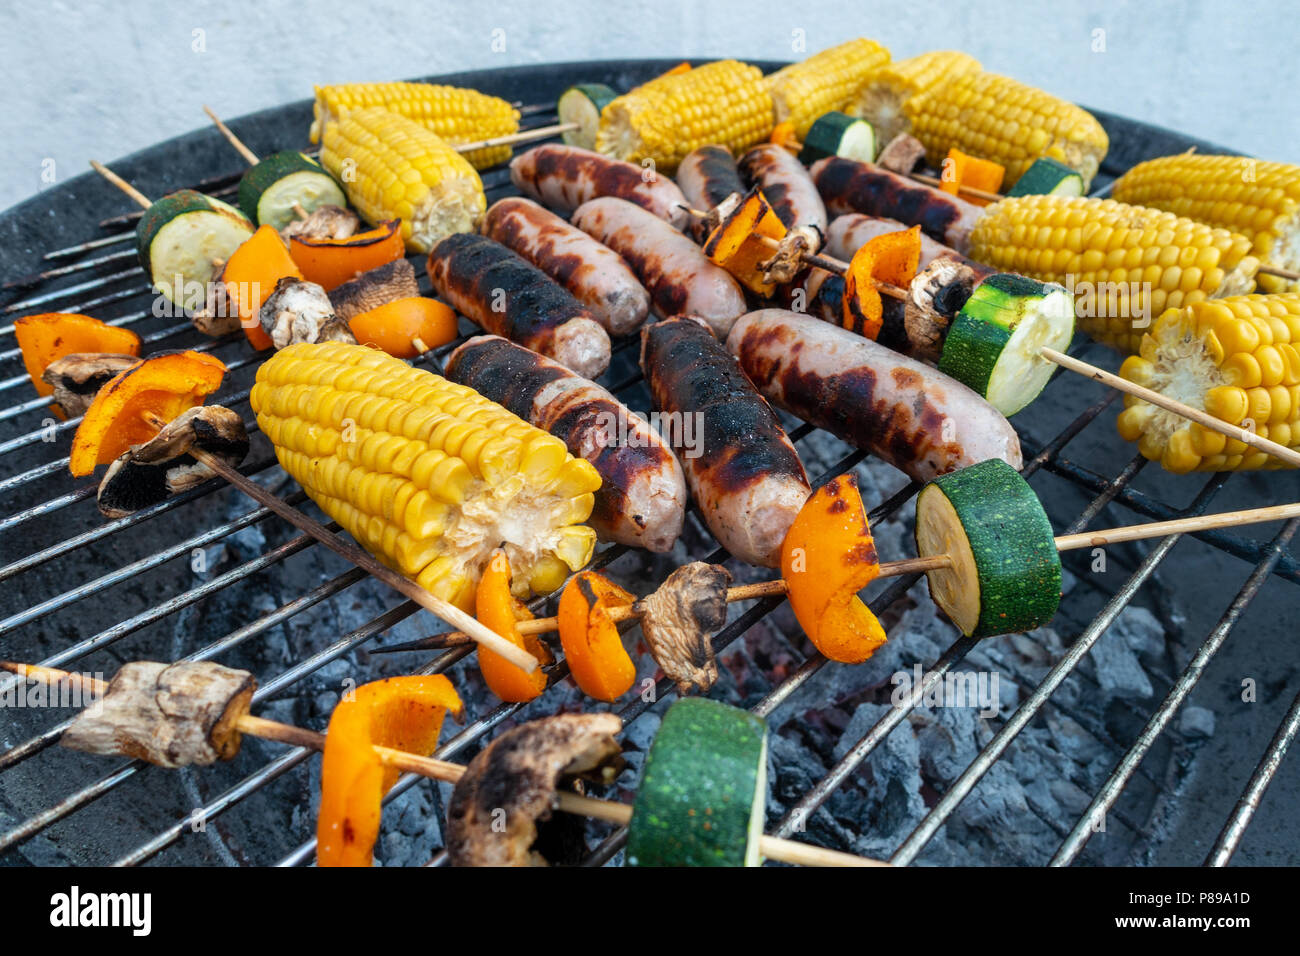 Sausages, corn on the cob and vegetable kebabs of mushroom, pepper and courgette cooking outside on a barbeque. Stock Photo